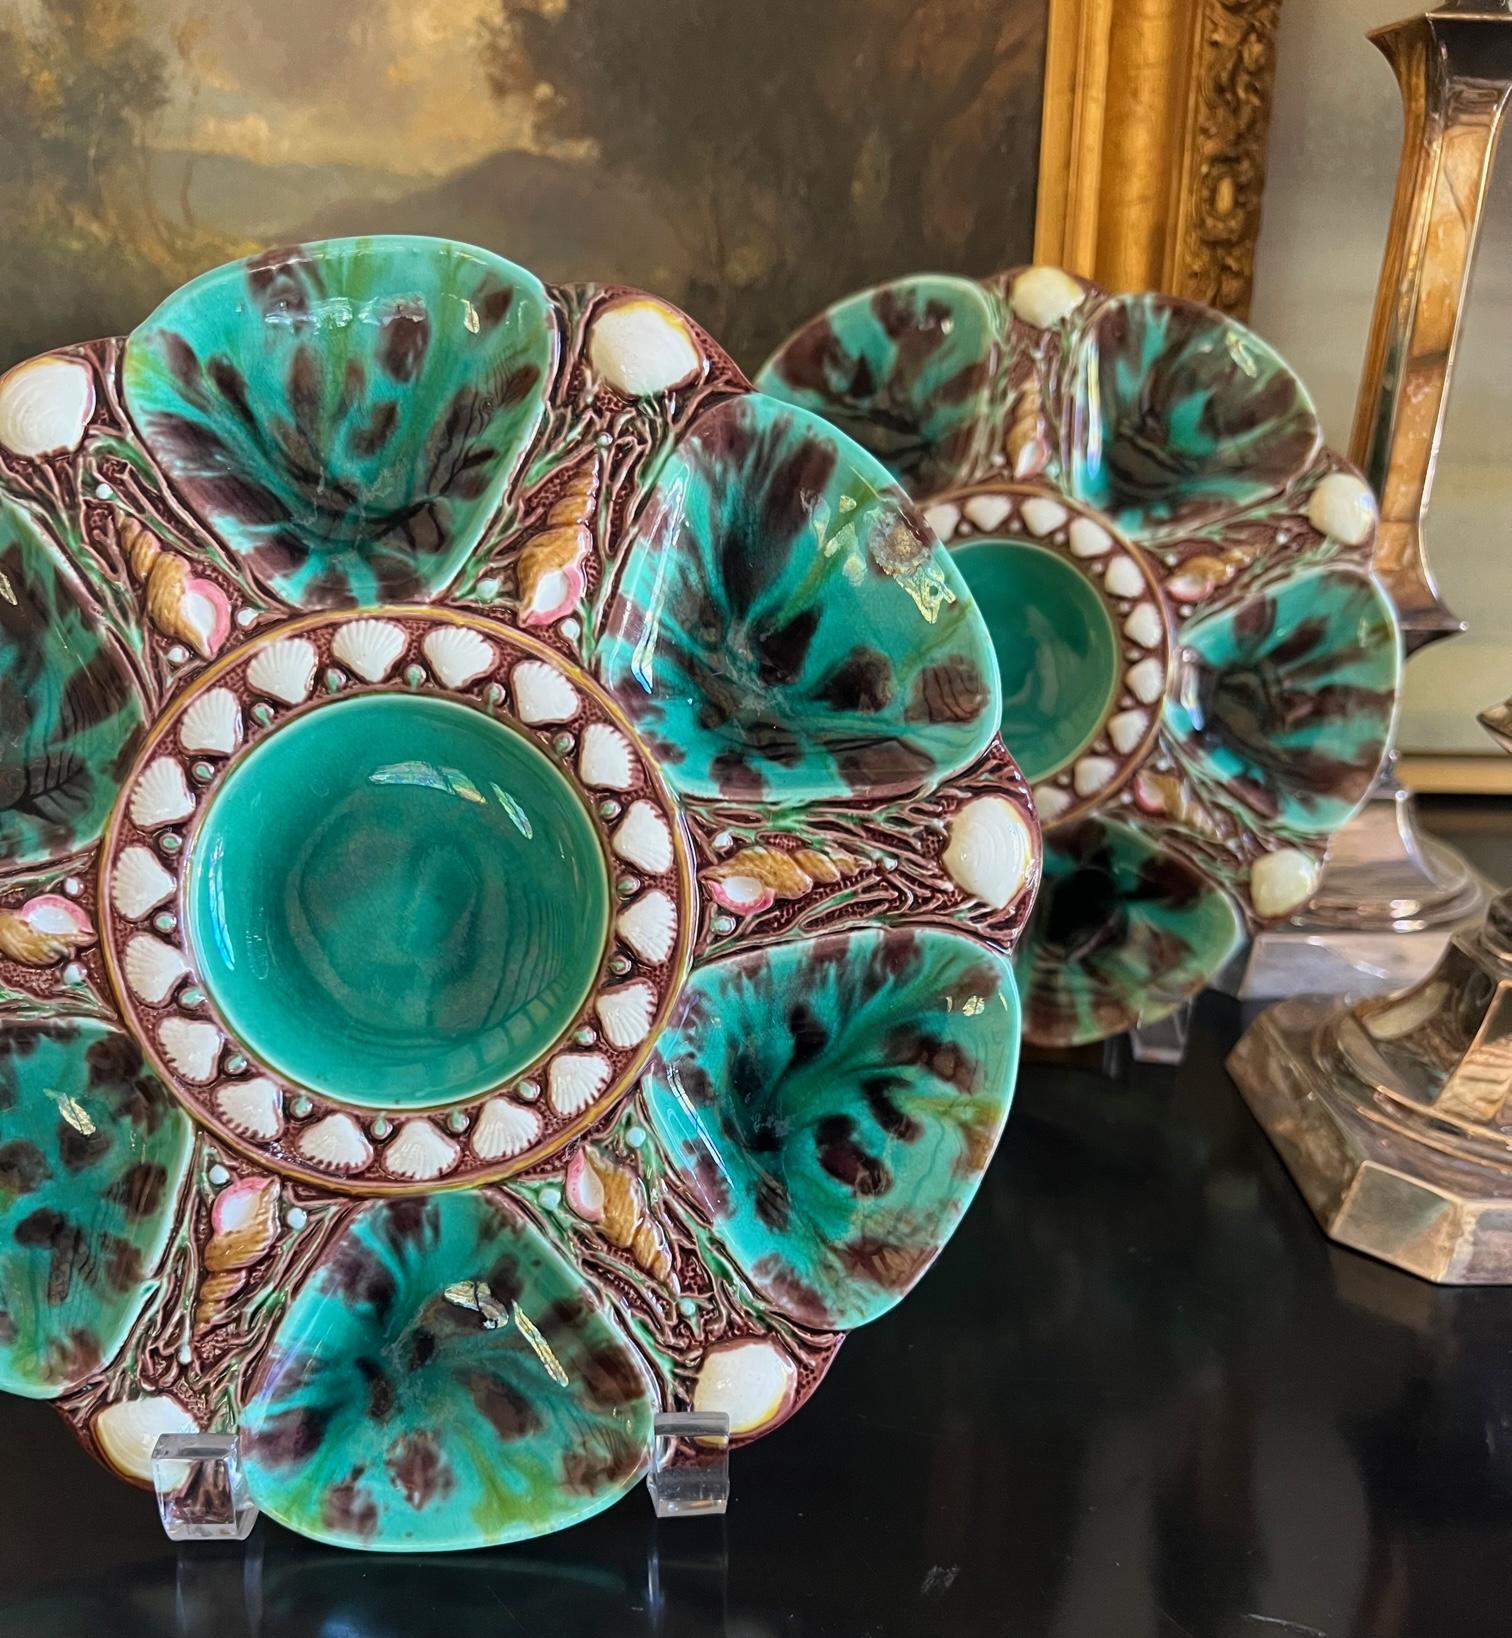 Antique Minton Green Majolica Oyster Plate, circa 1860's-1870's For Sale 6